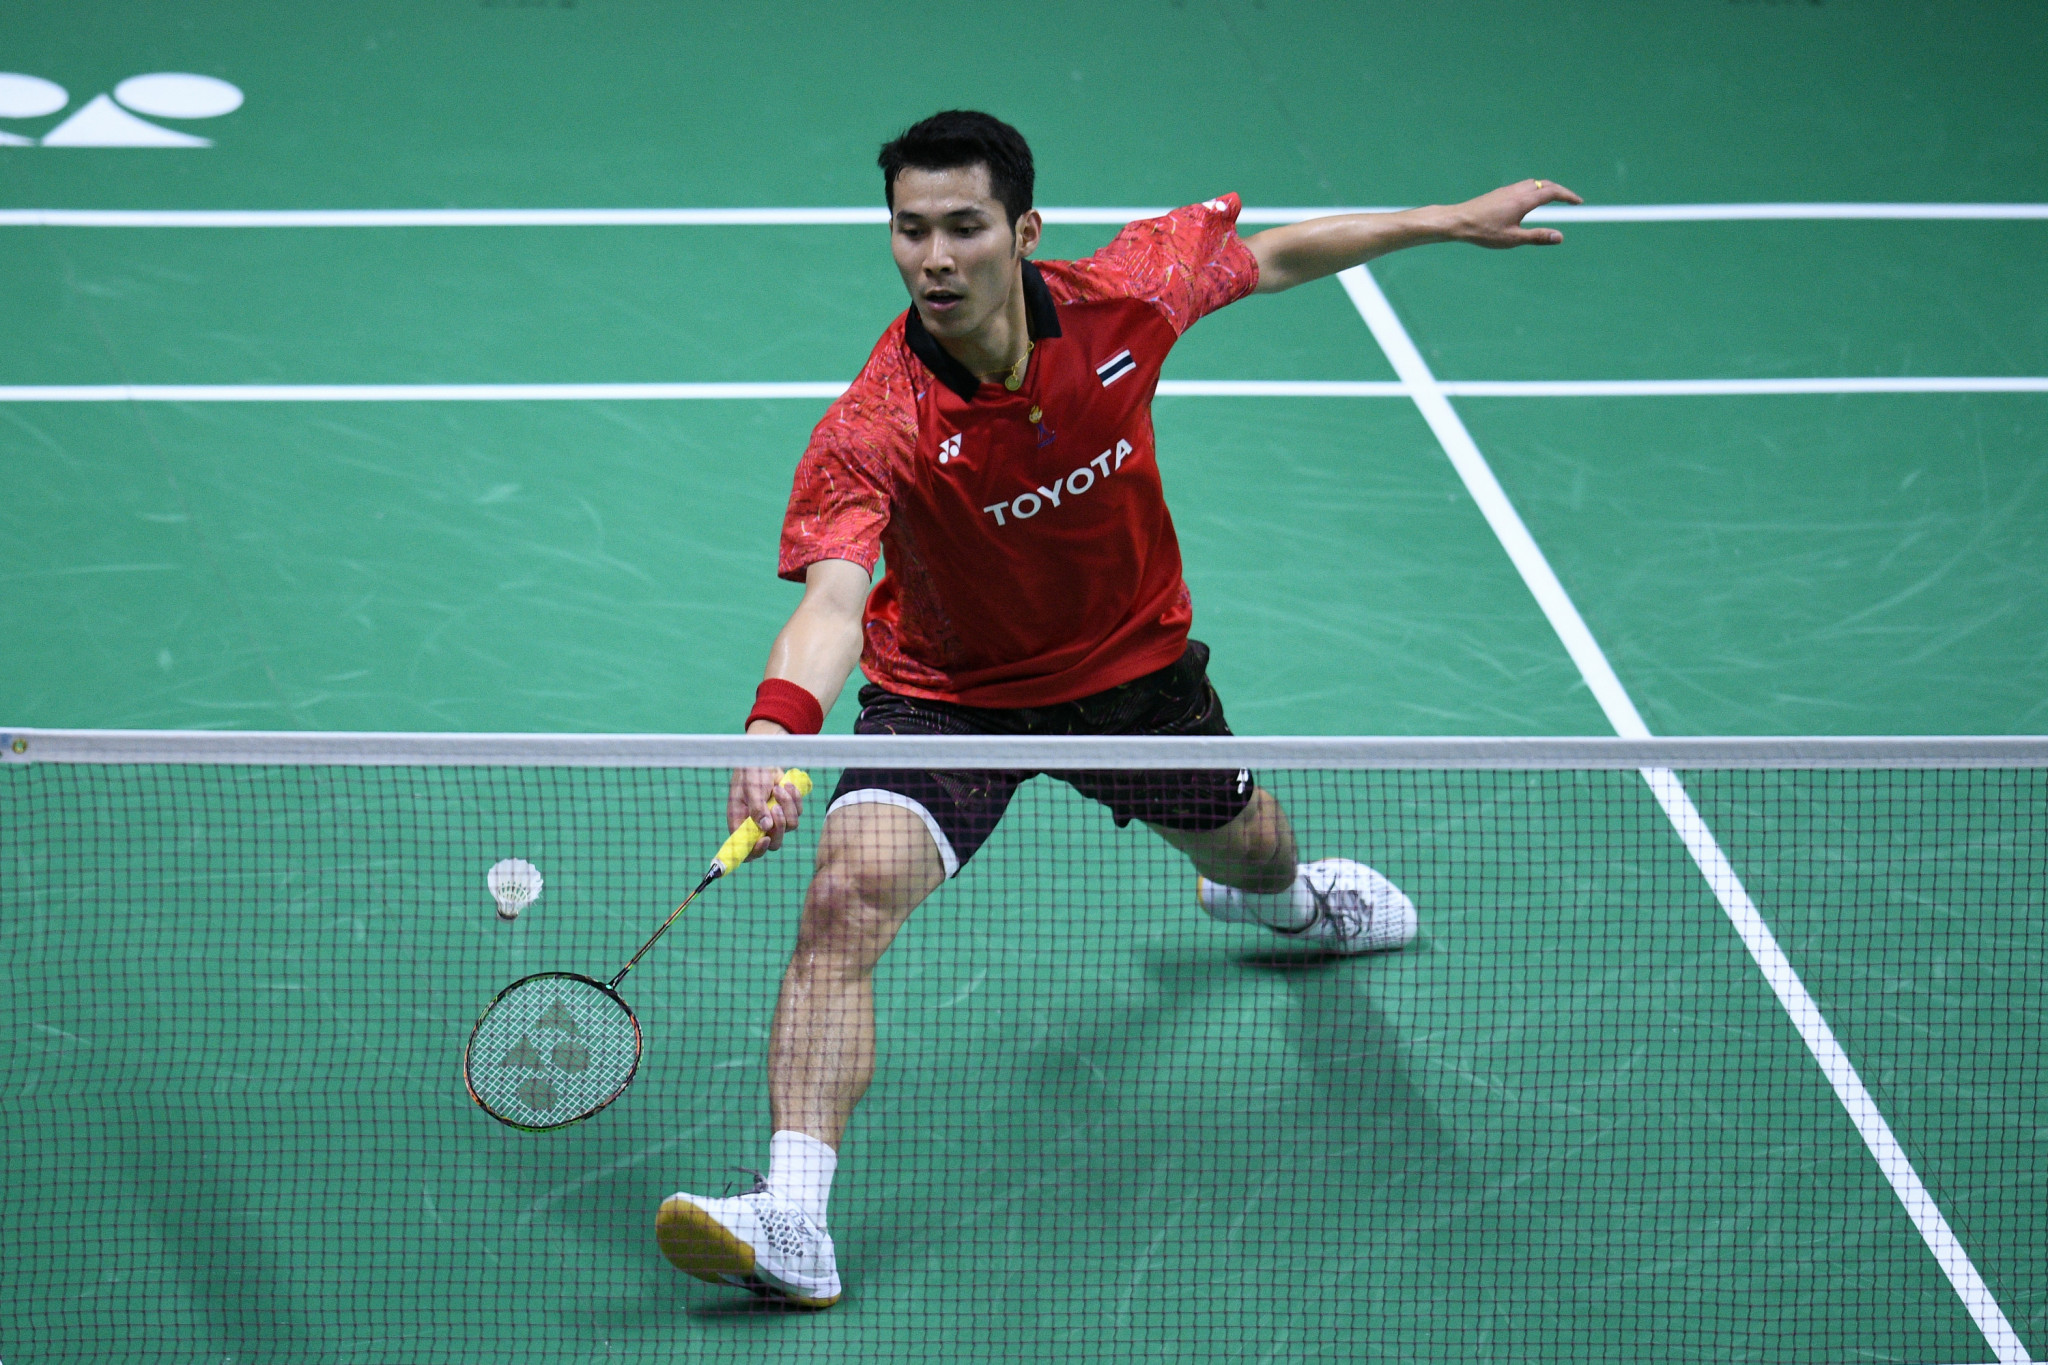 Top seed Avihingsanon reaches quarter-finals at BWF Spain Masters